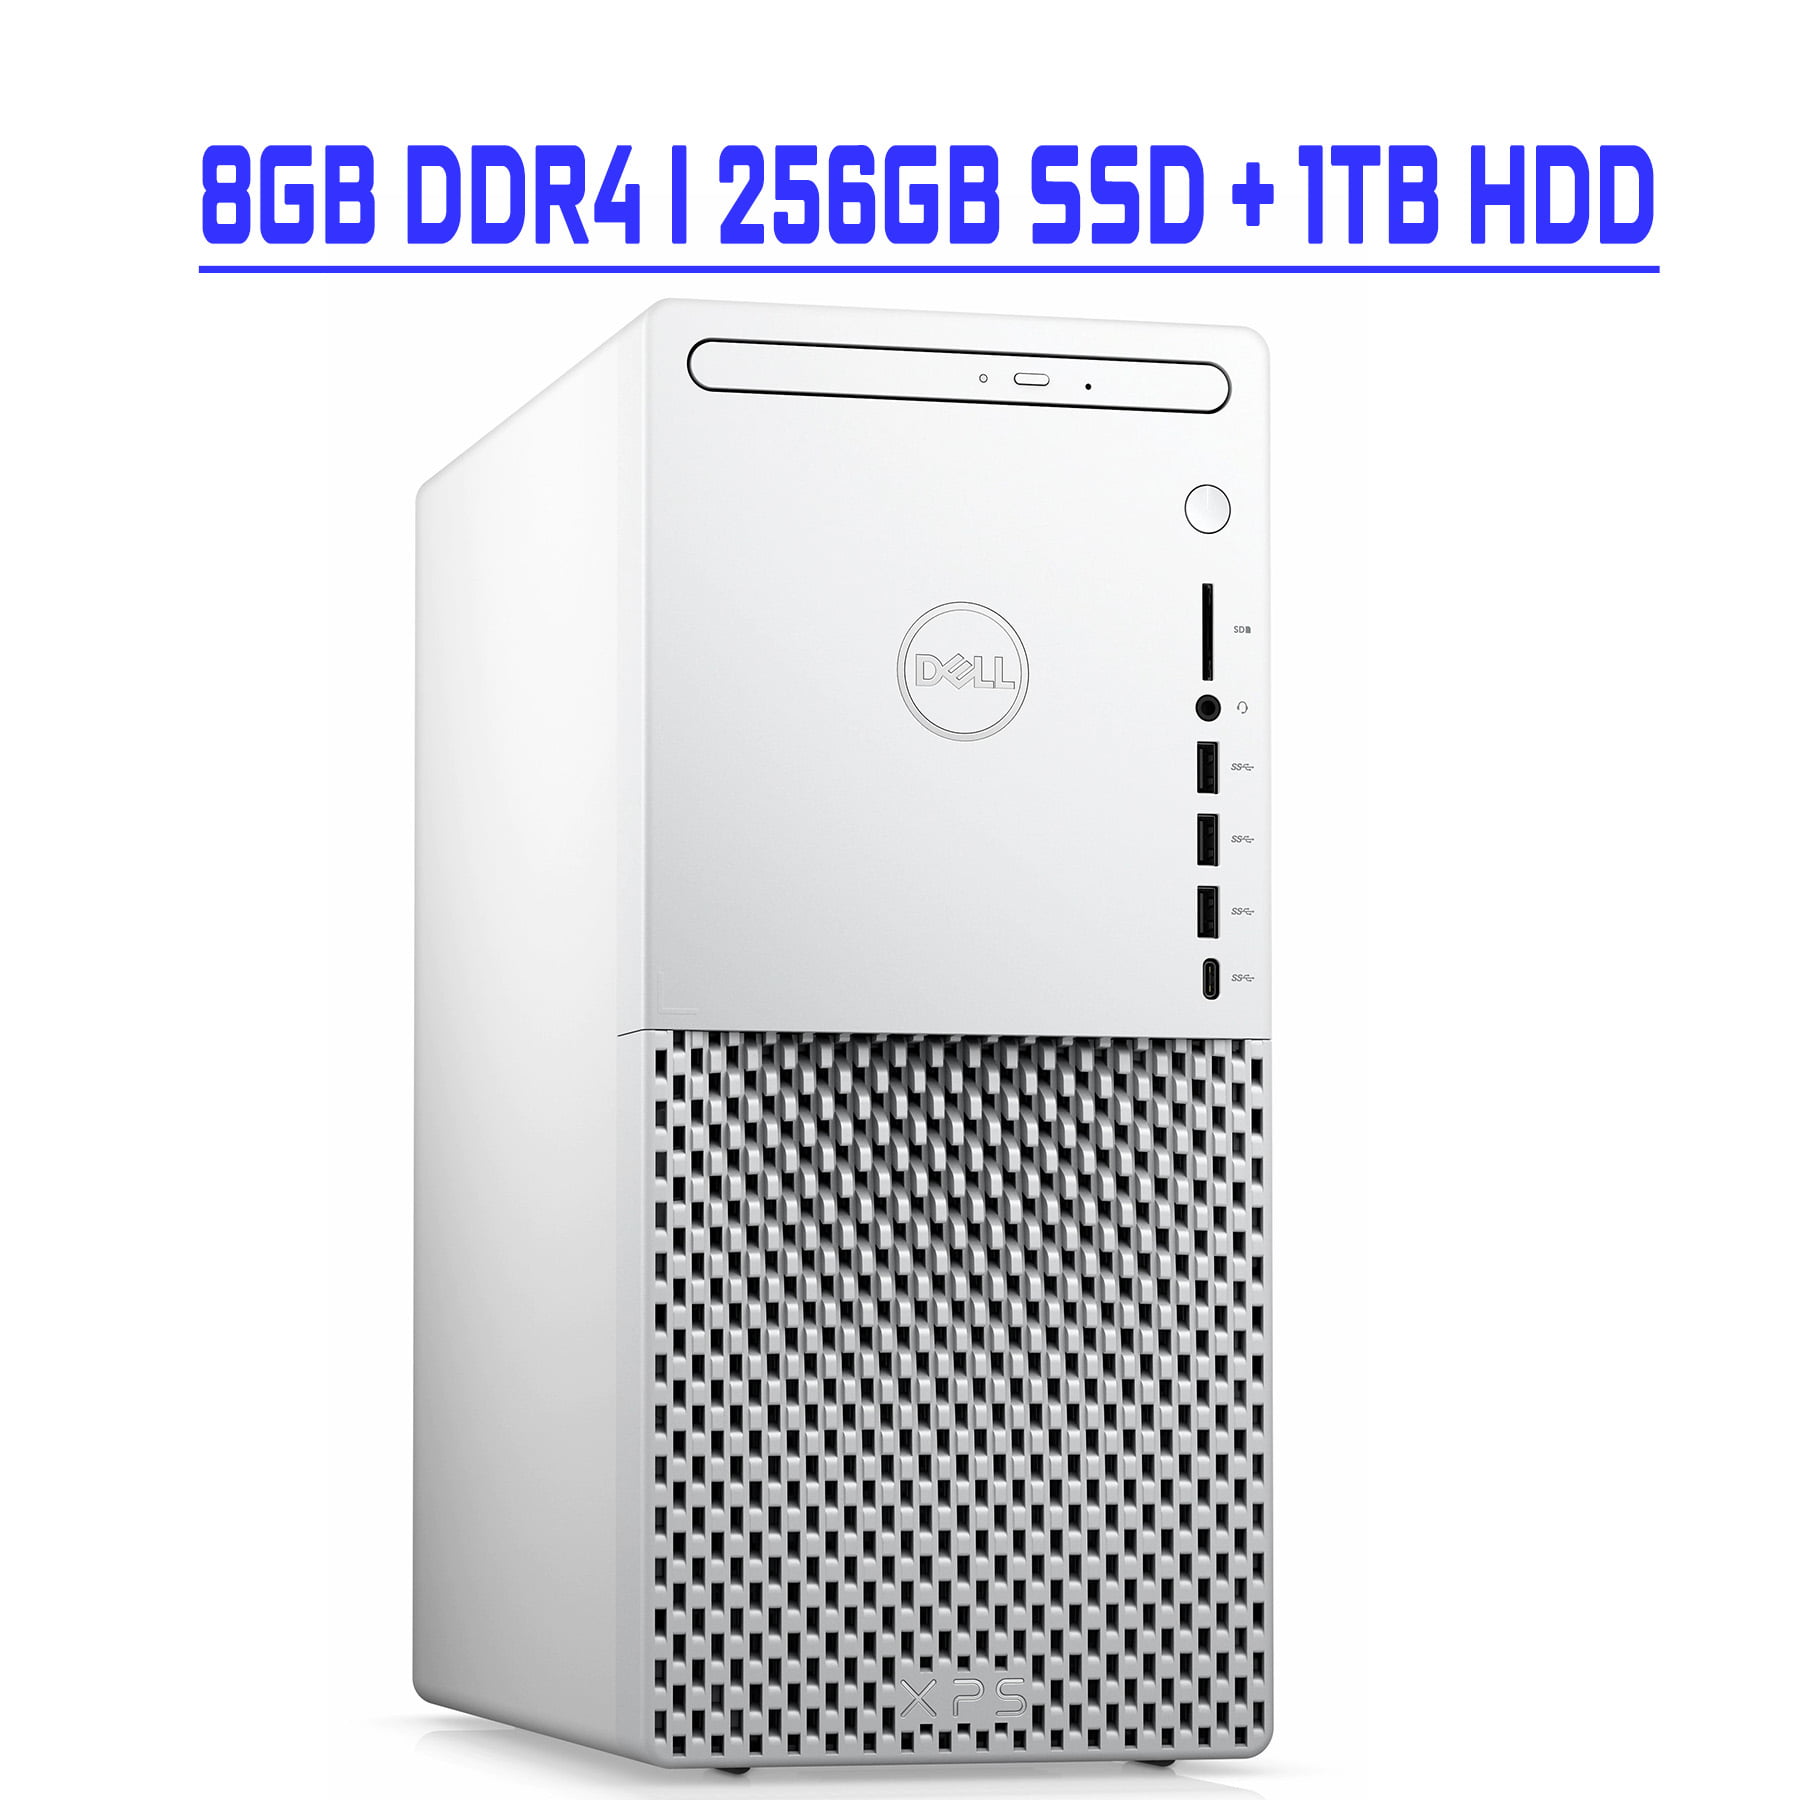 Dell Gaming Computer Tower Core i3 8GB 500GB with Nvidia GT 740 Windows 10  PC